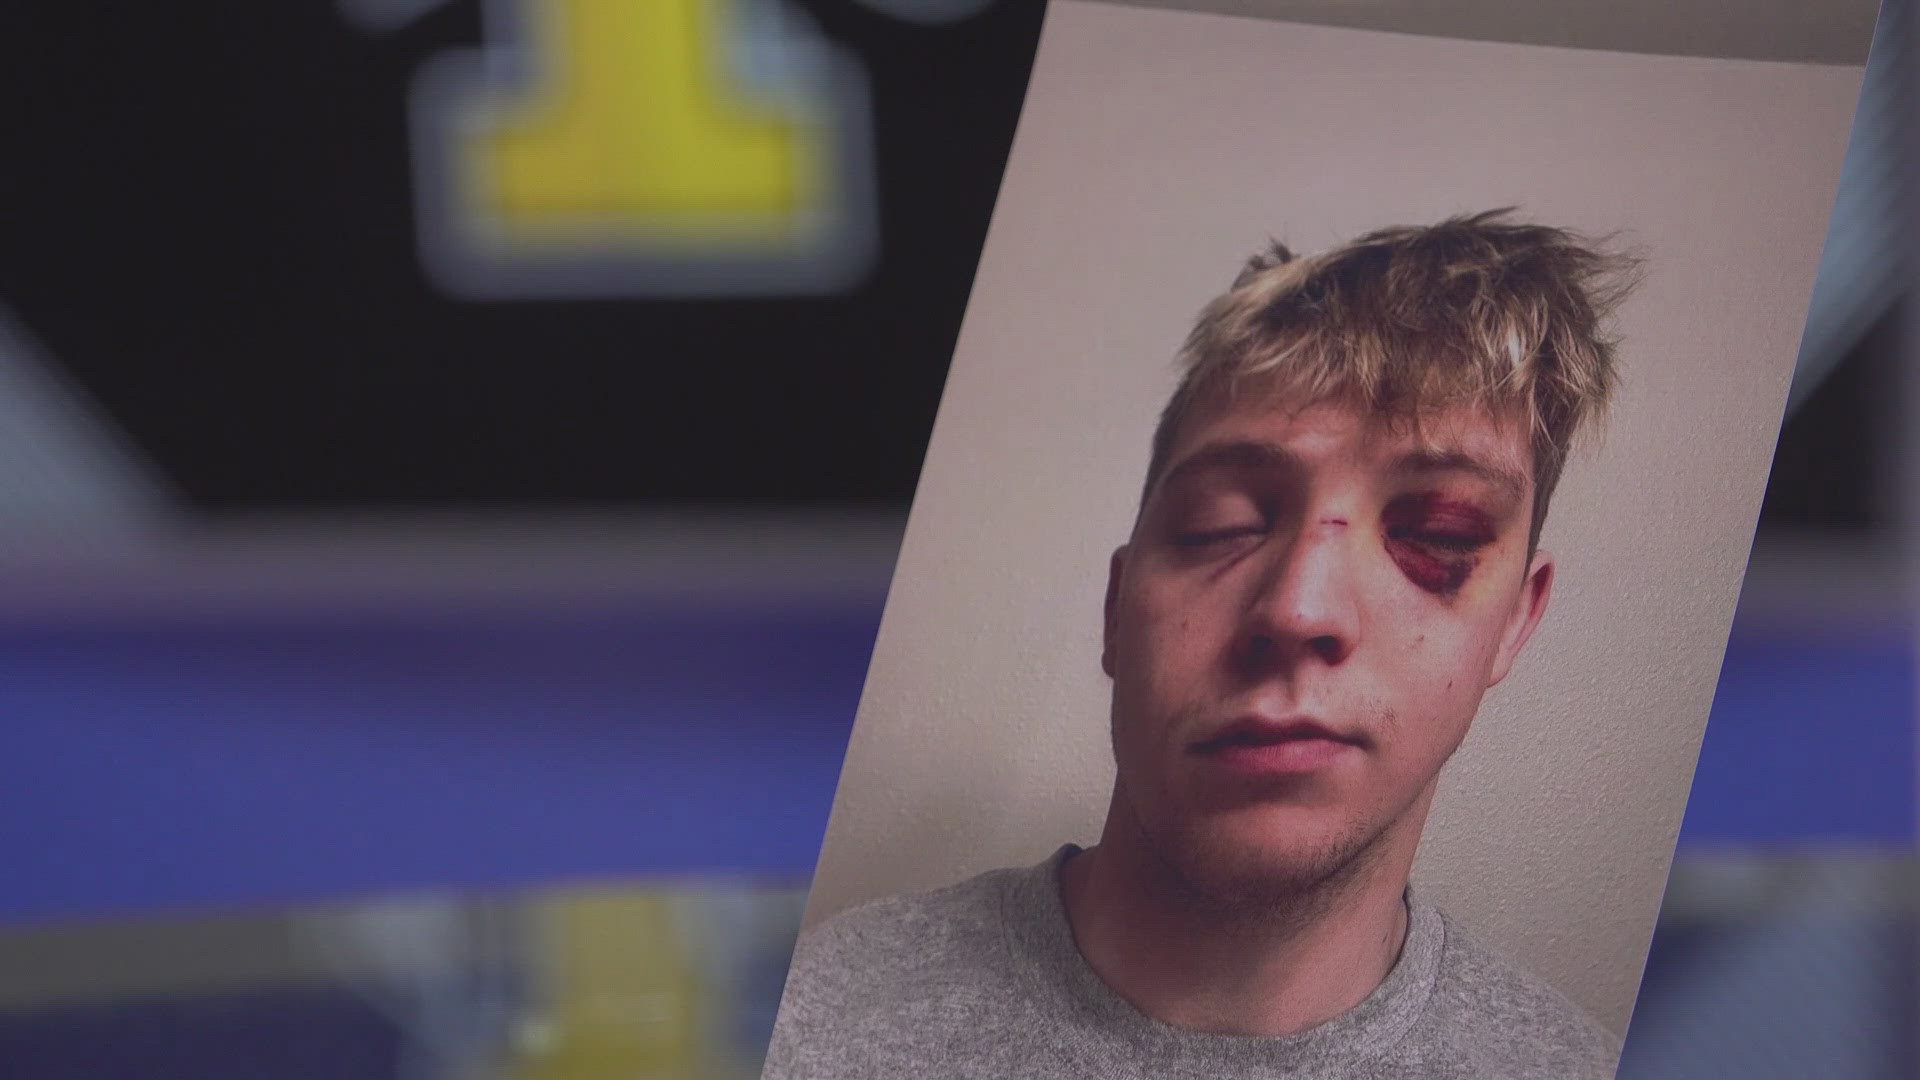 The attorney for Timmy Reed and his family is calling on the University of Idaho to hold the football players accountable for their alleged acts of violence.